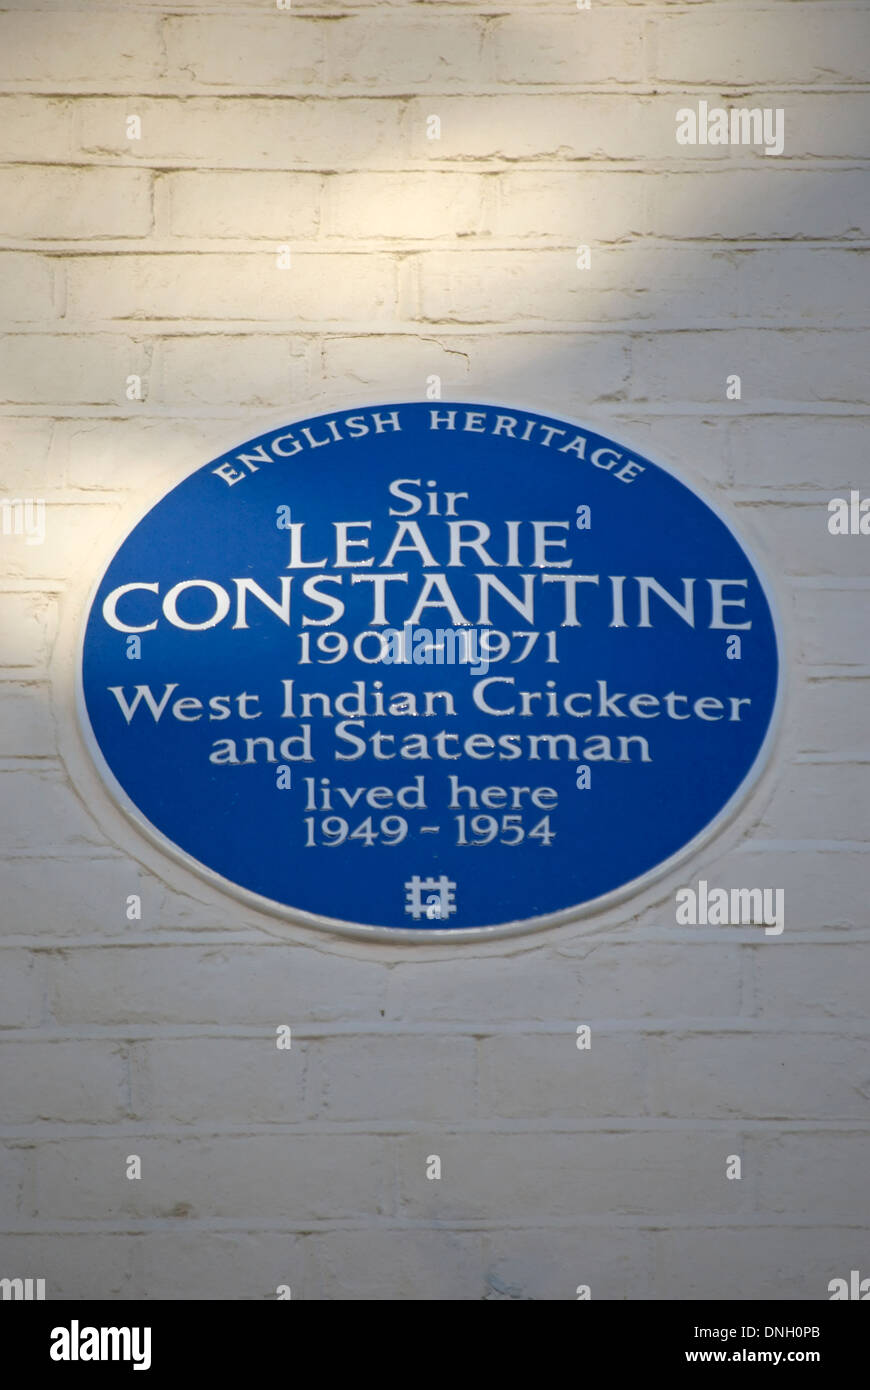 english heritage blue plaque marking a home of west indian cricketer and statesman sir learie constantine, kensington, london Stock Photo